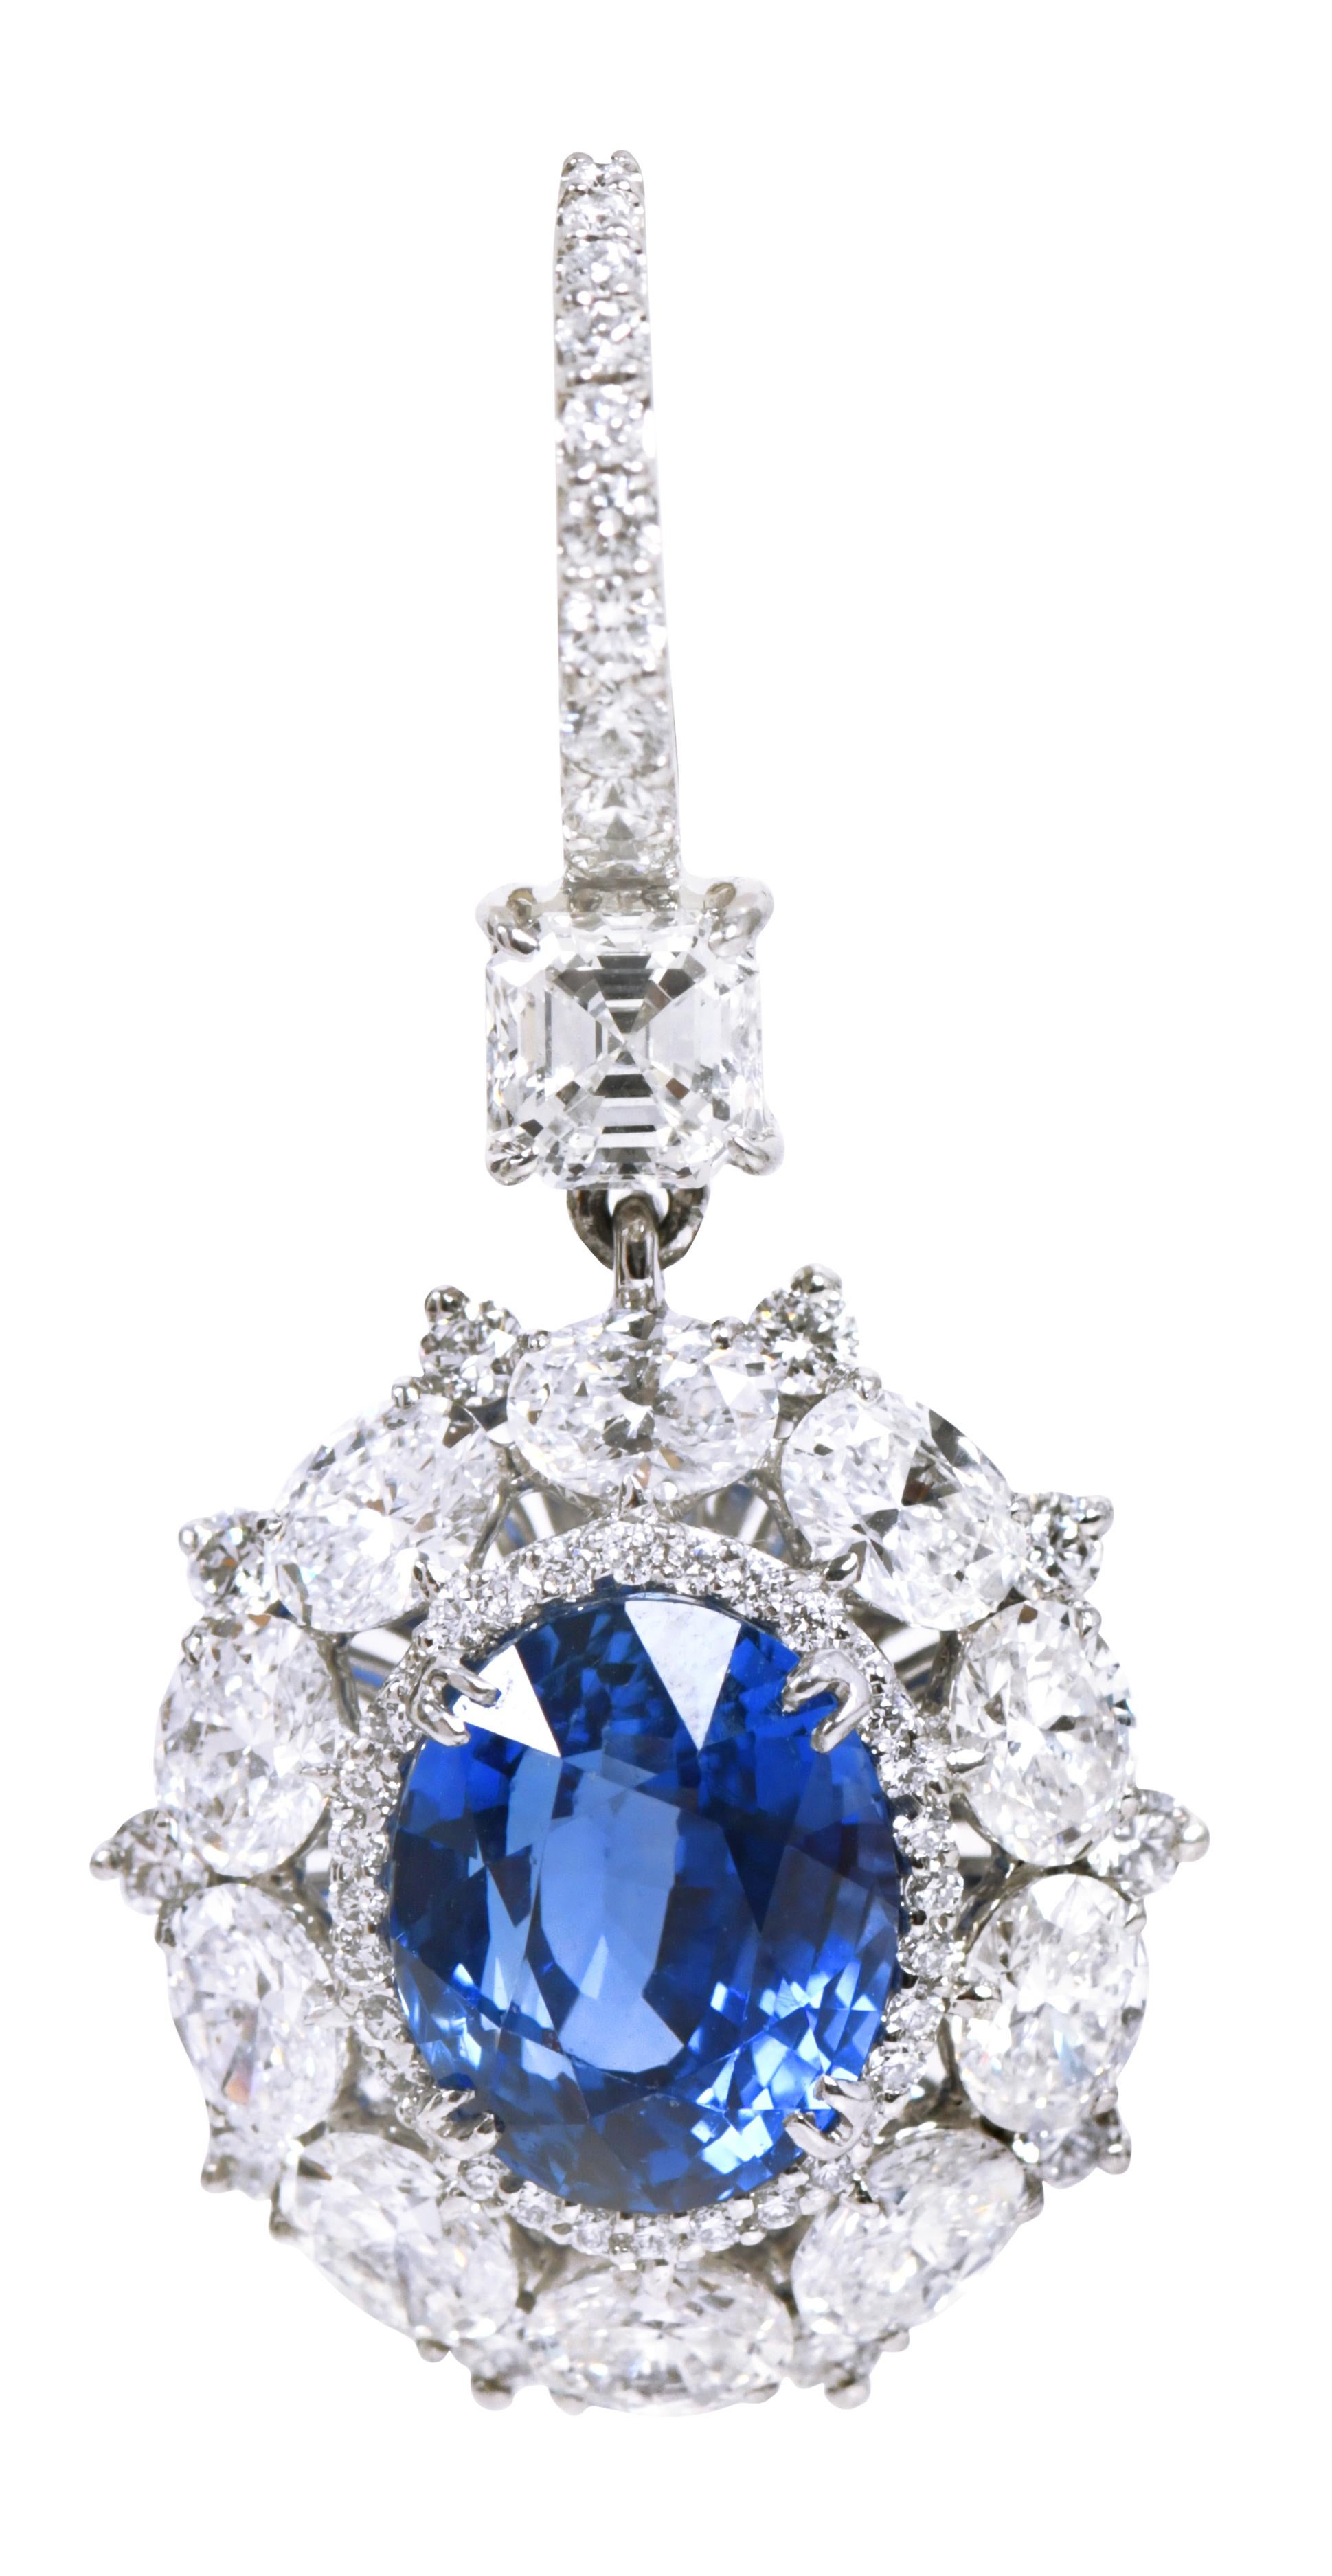 Contemporary Platinum 15.23 Carats Solitaire Diamond and Blue Sapphire Cocktail Earrings For Sale